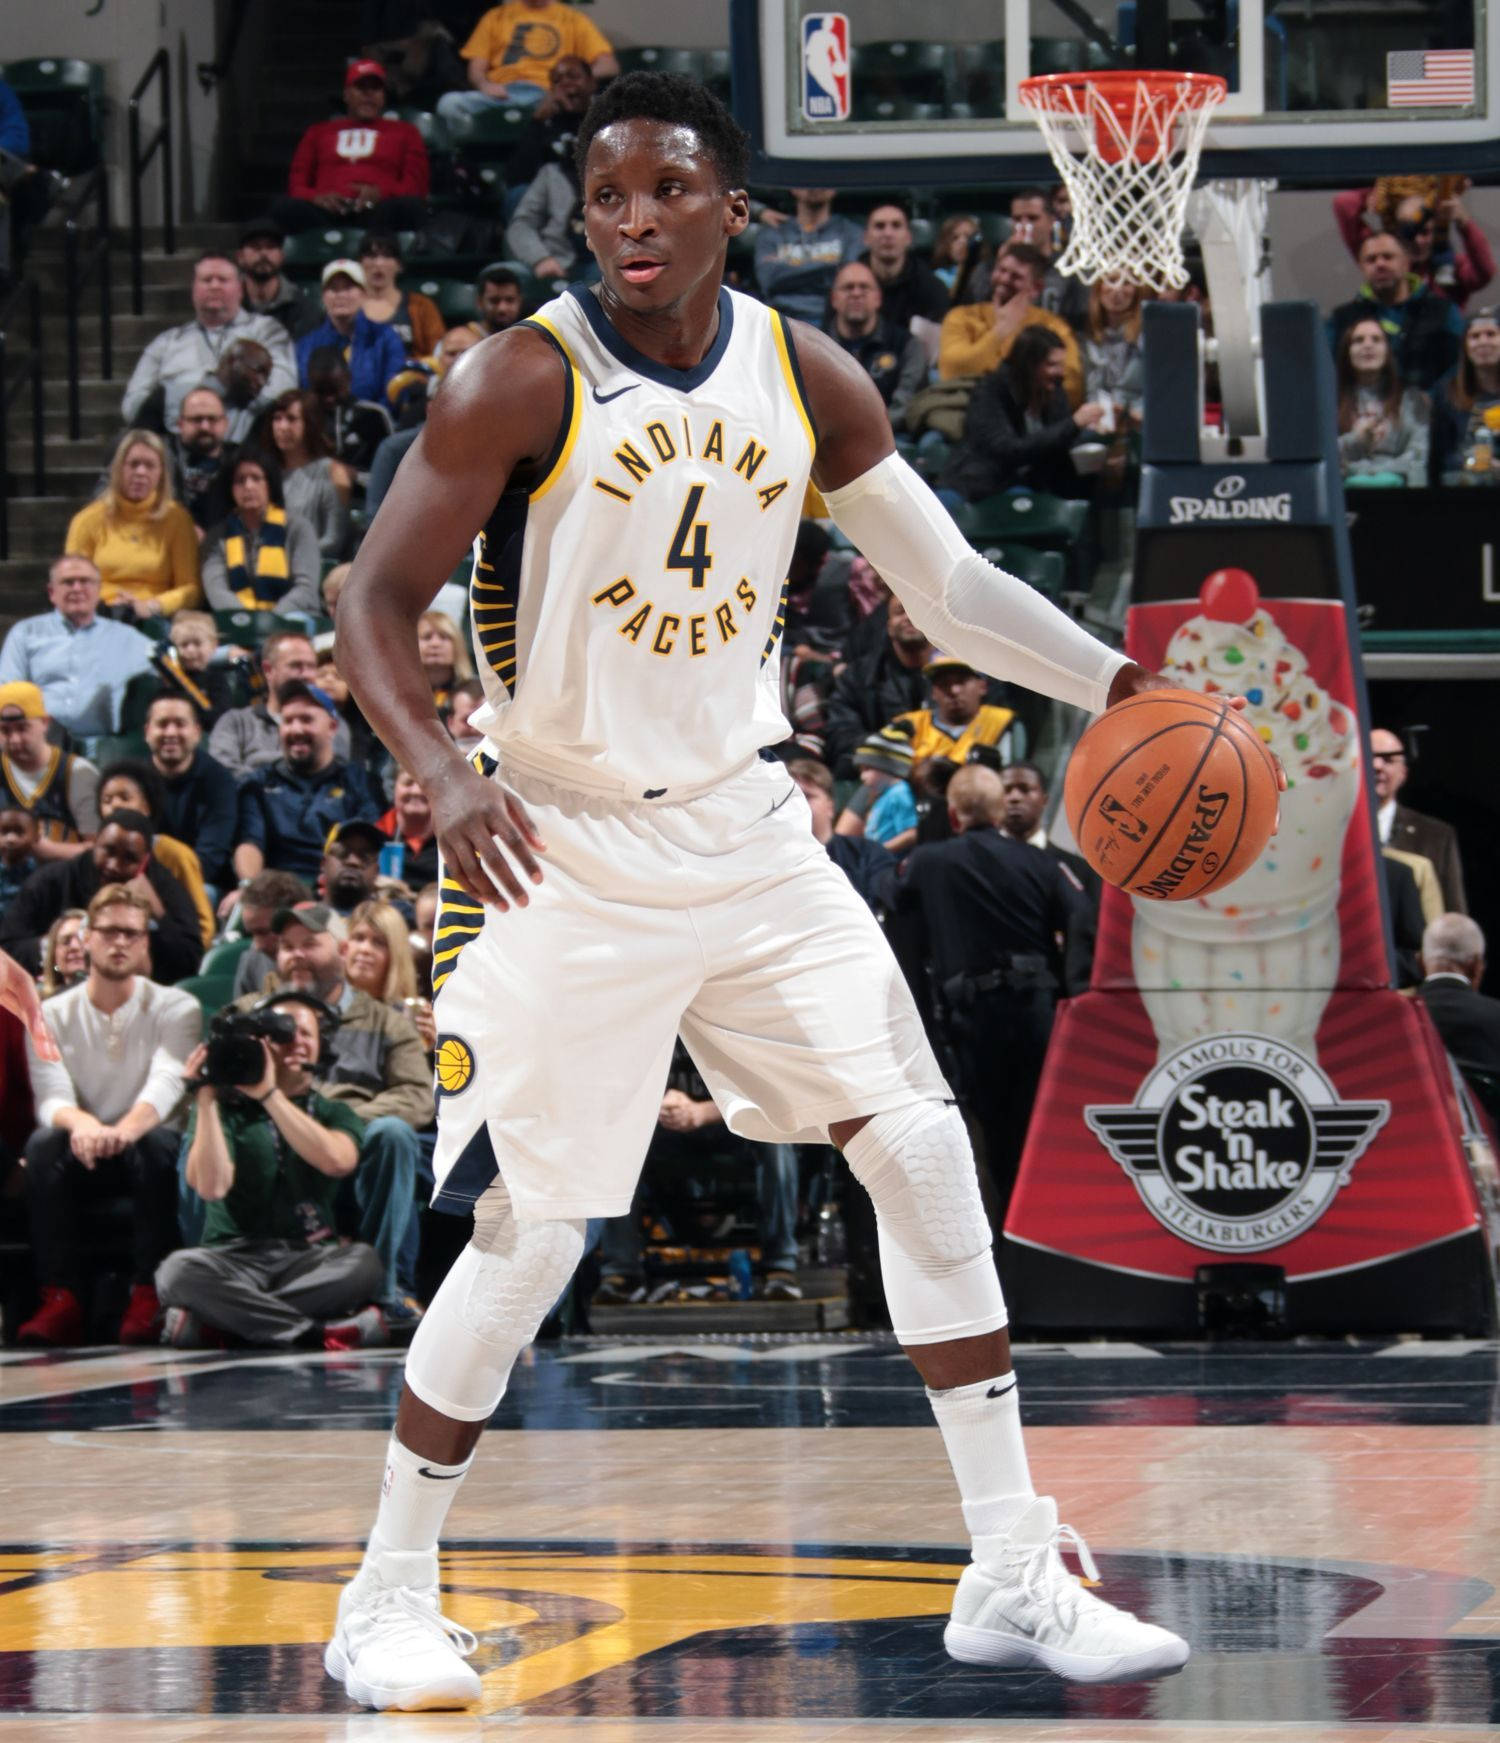 Victor Oladipo In All-white Outfit